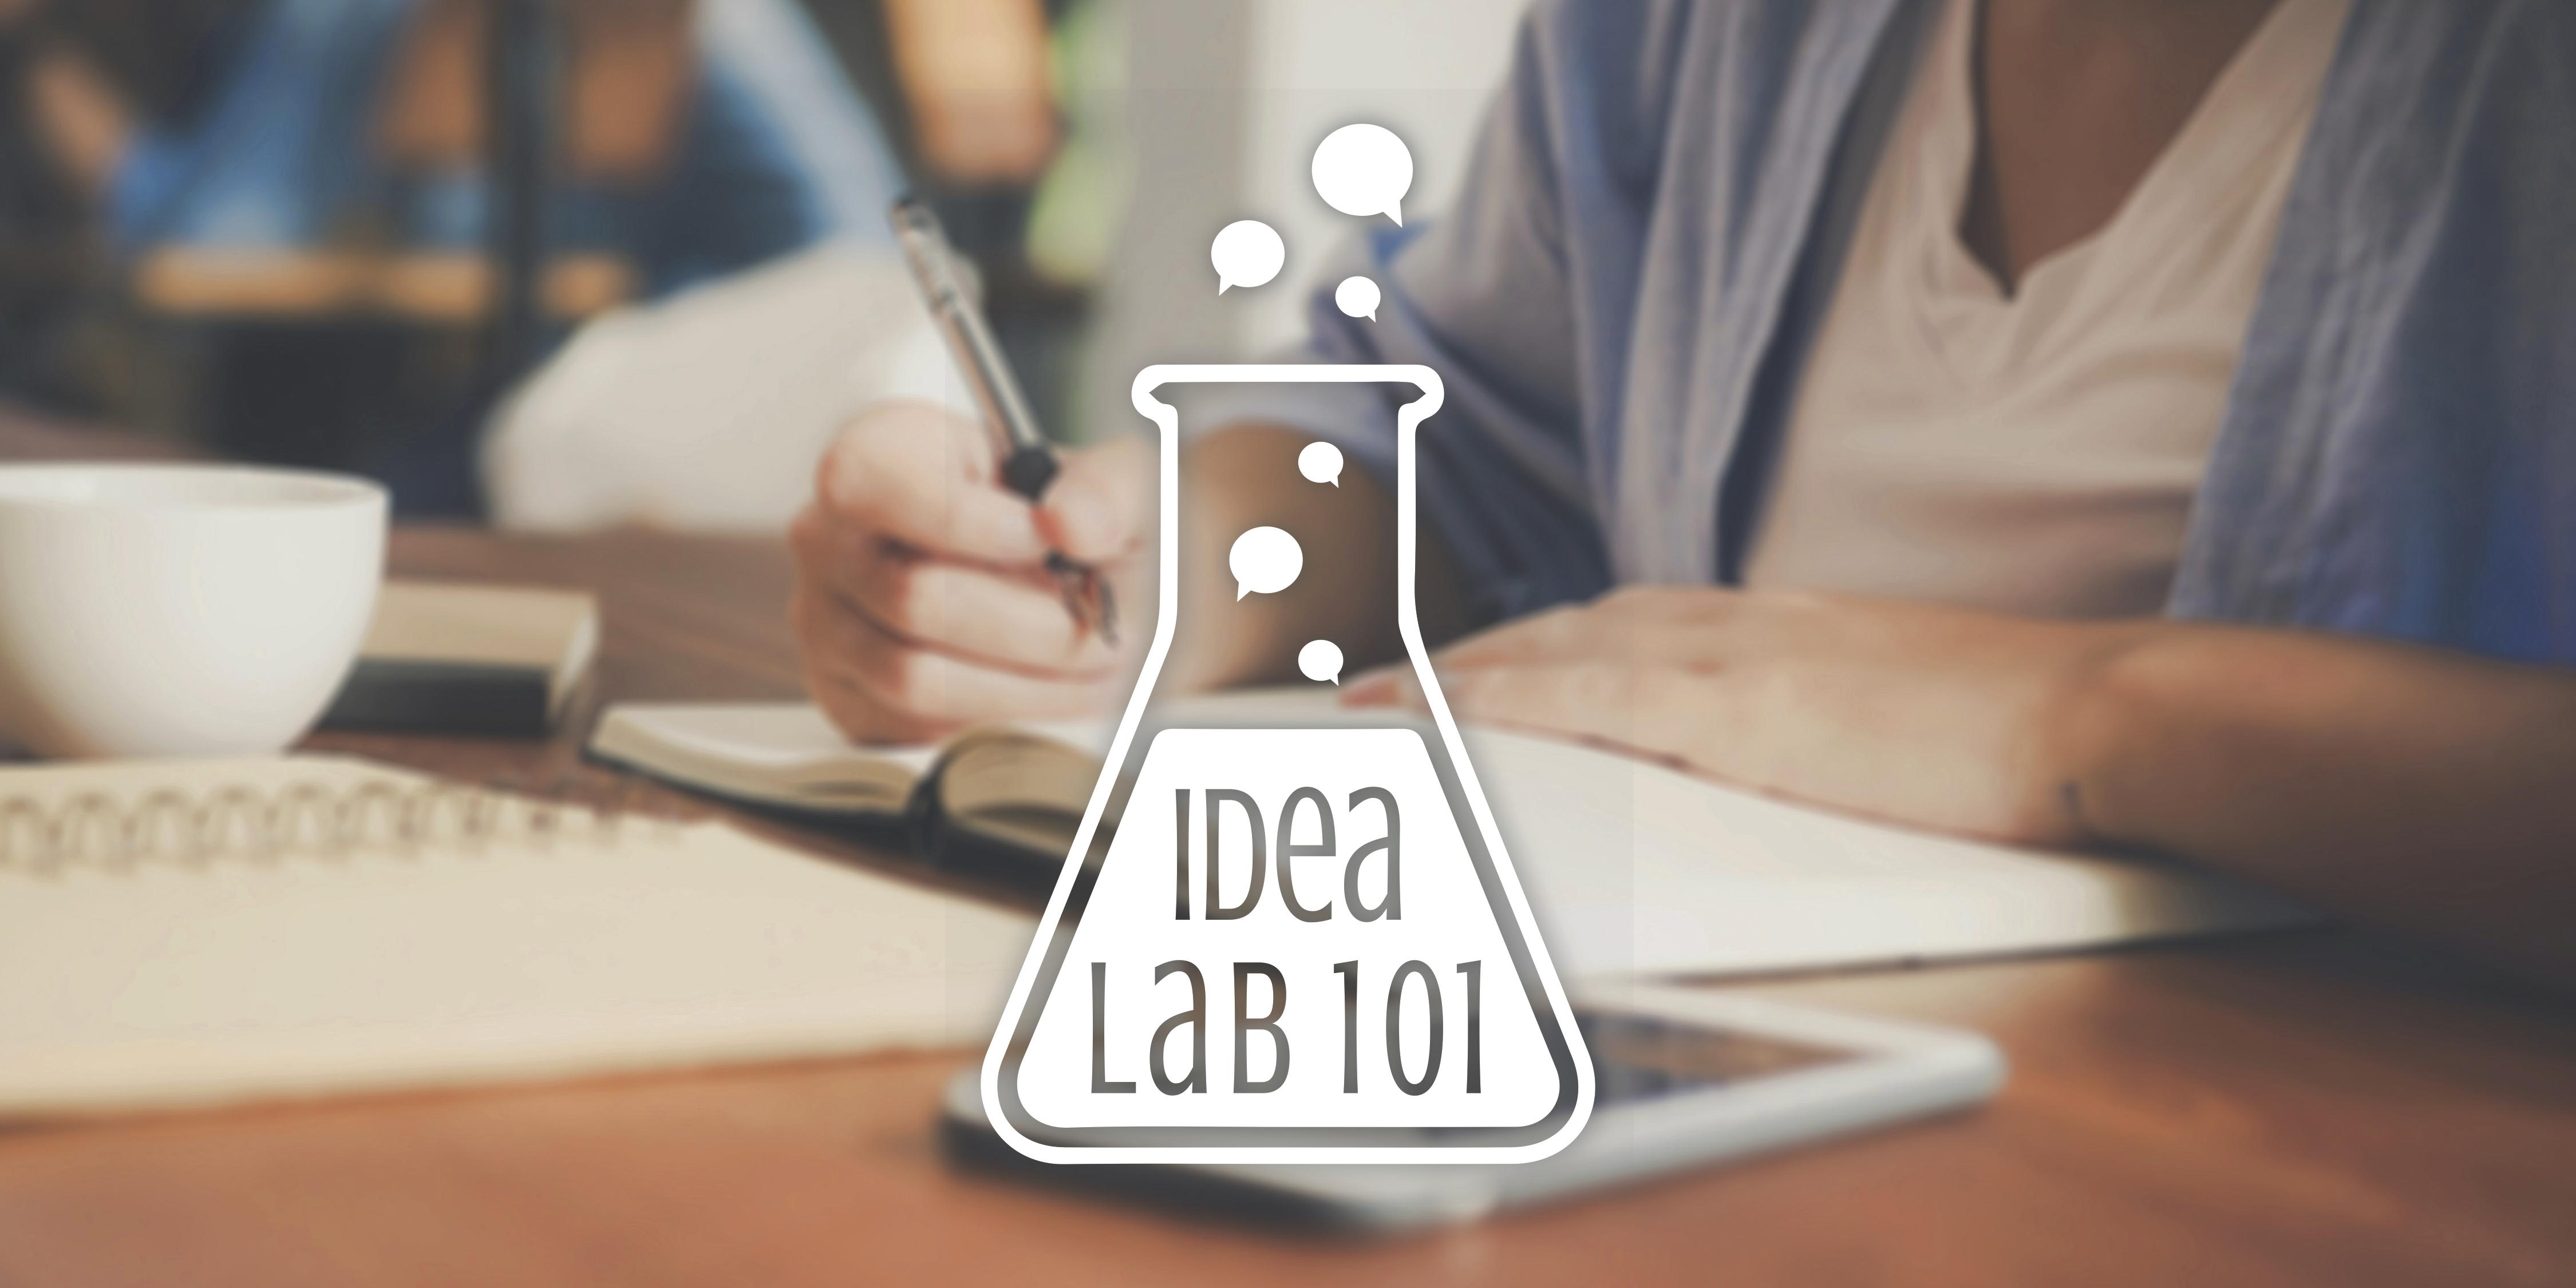 IDEA LAB 101 - Tax Tips for Small Business